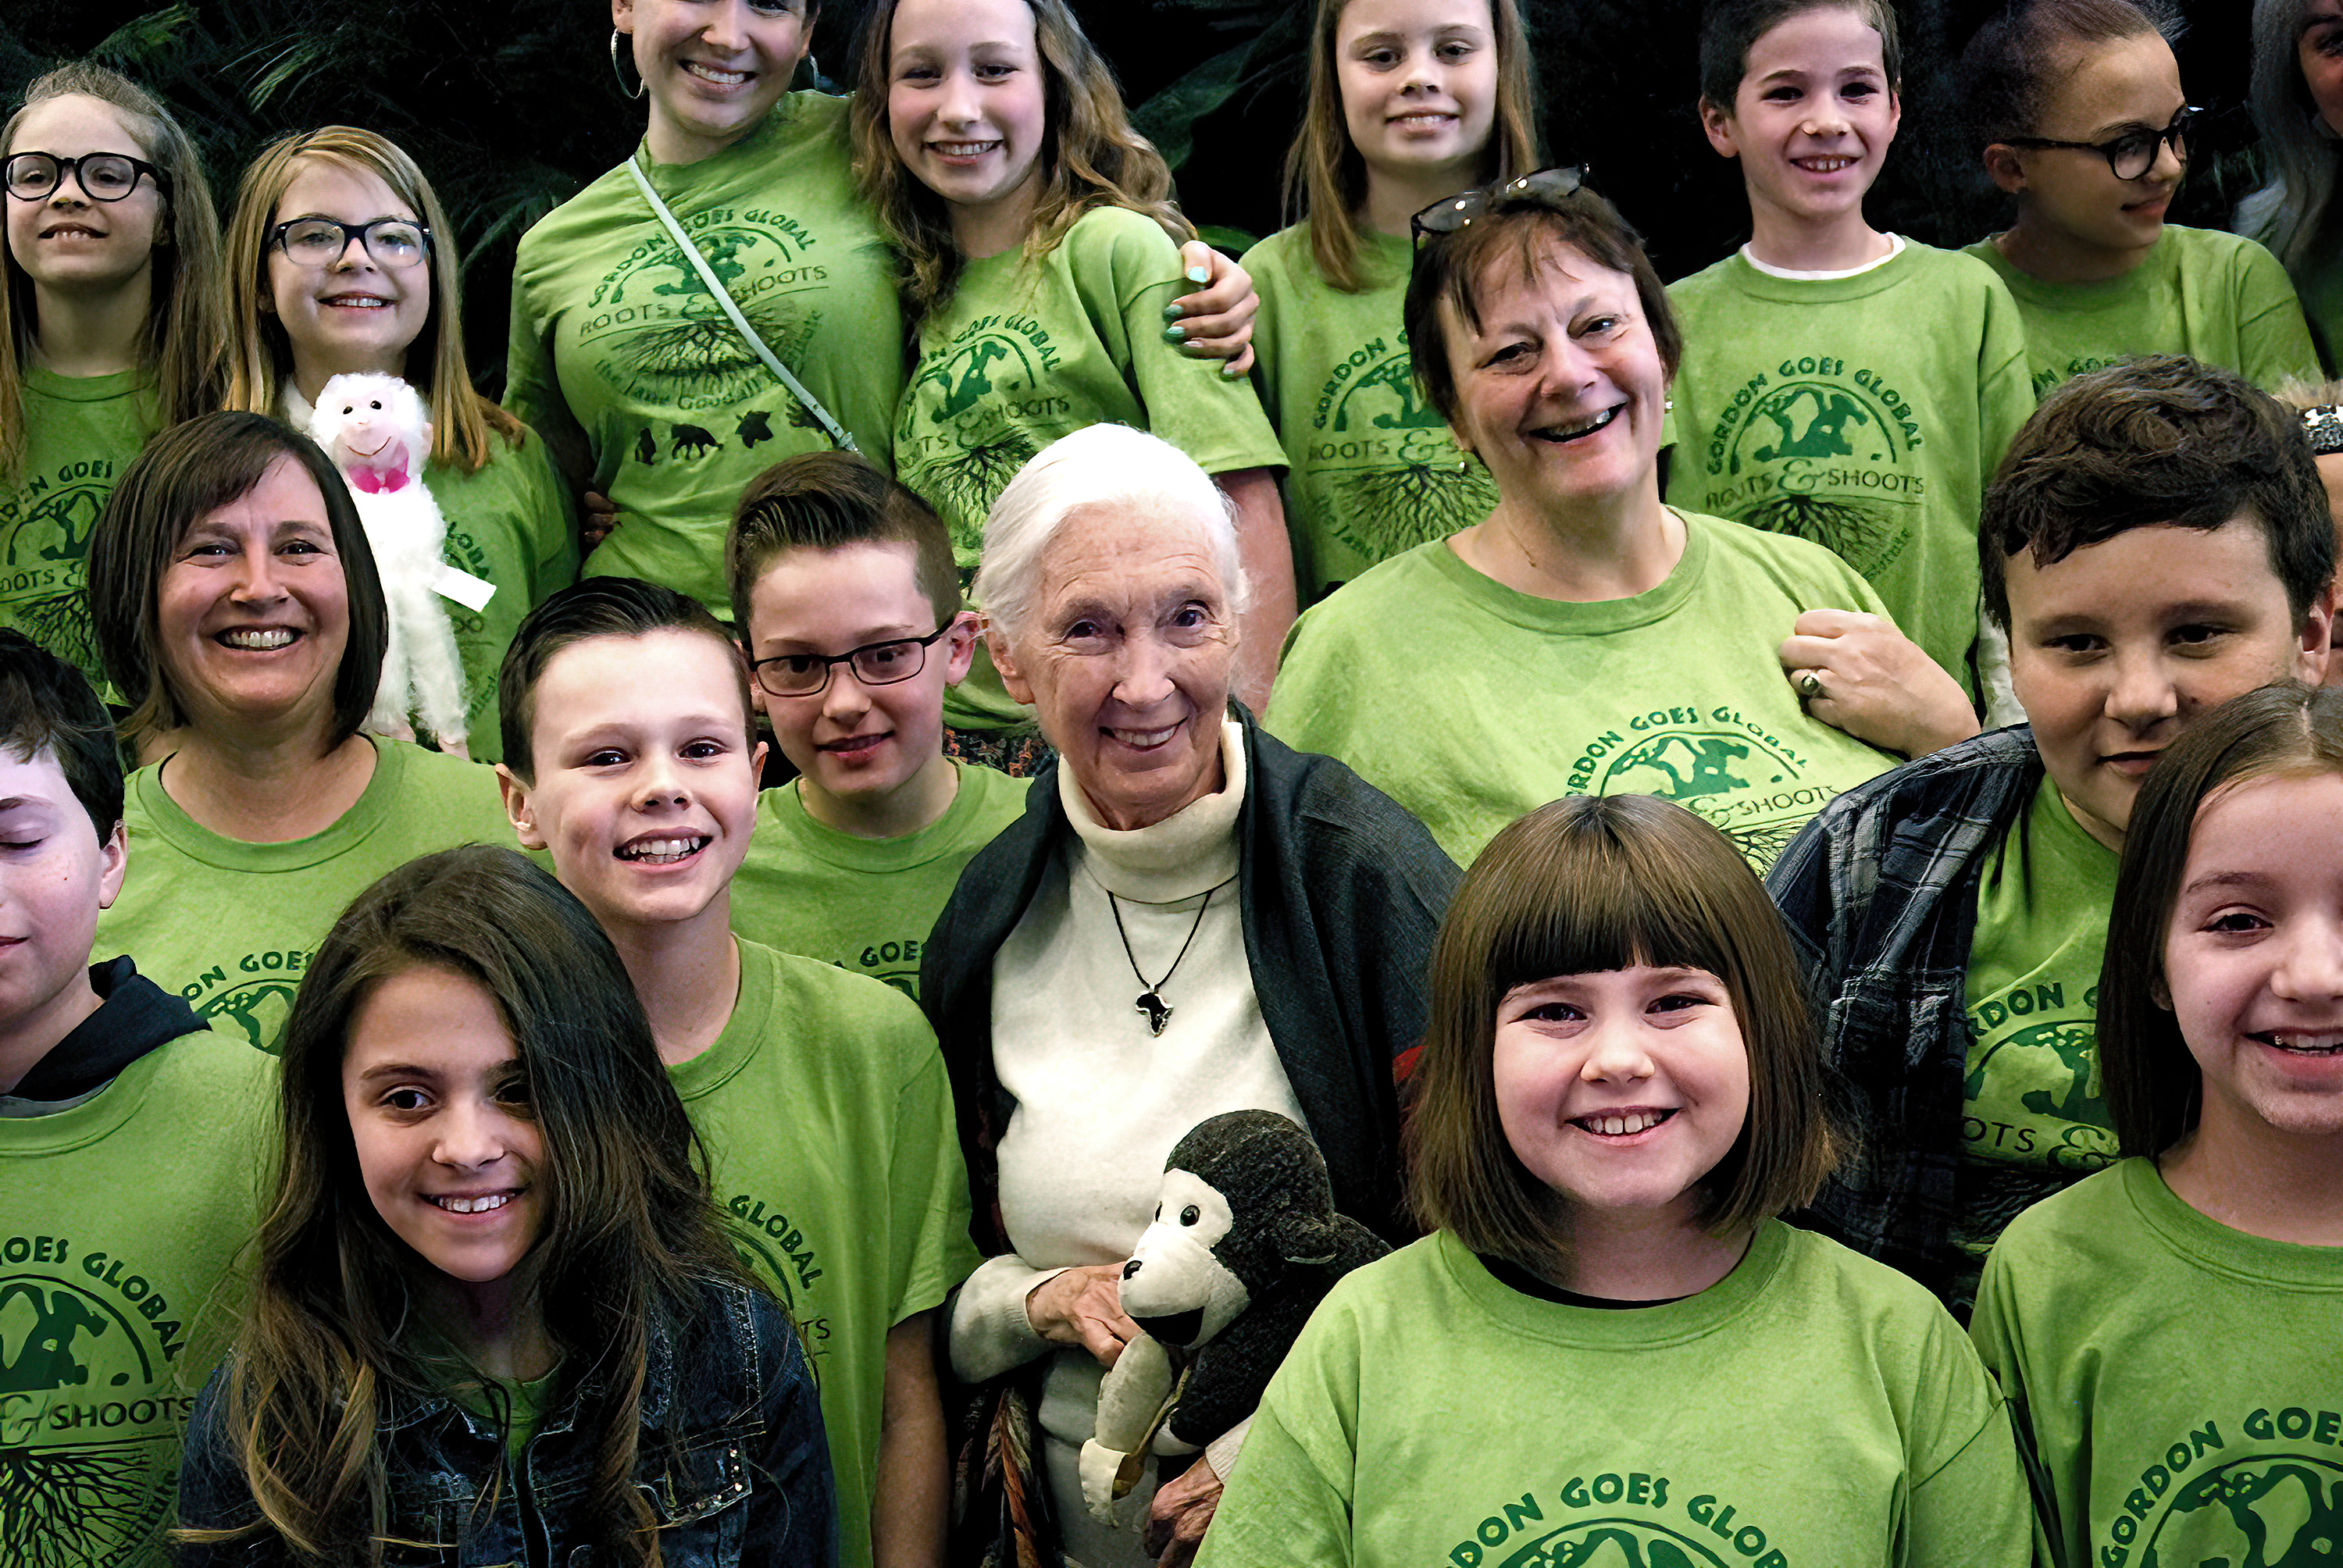 Dr. Jane Goodall poses for a photo with members of the Jane Goodall Institute's Roots & Shoots program.